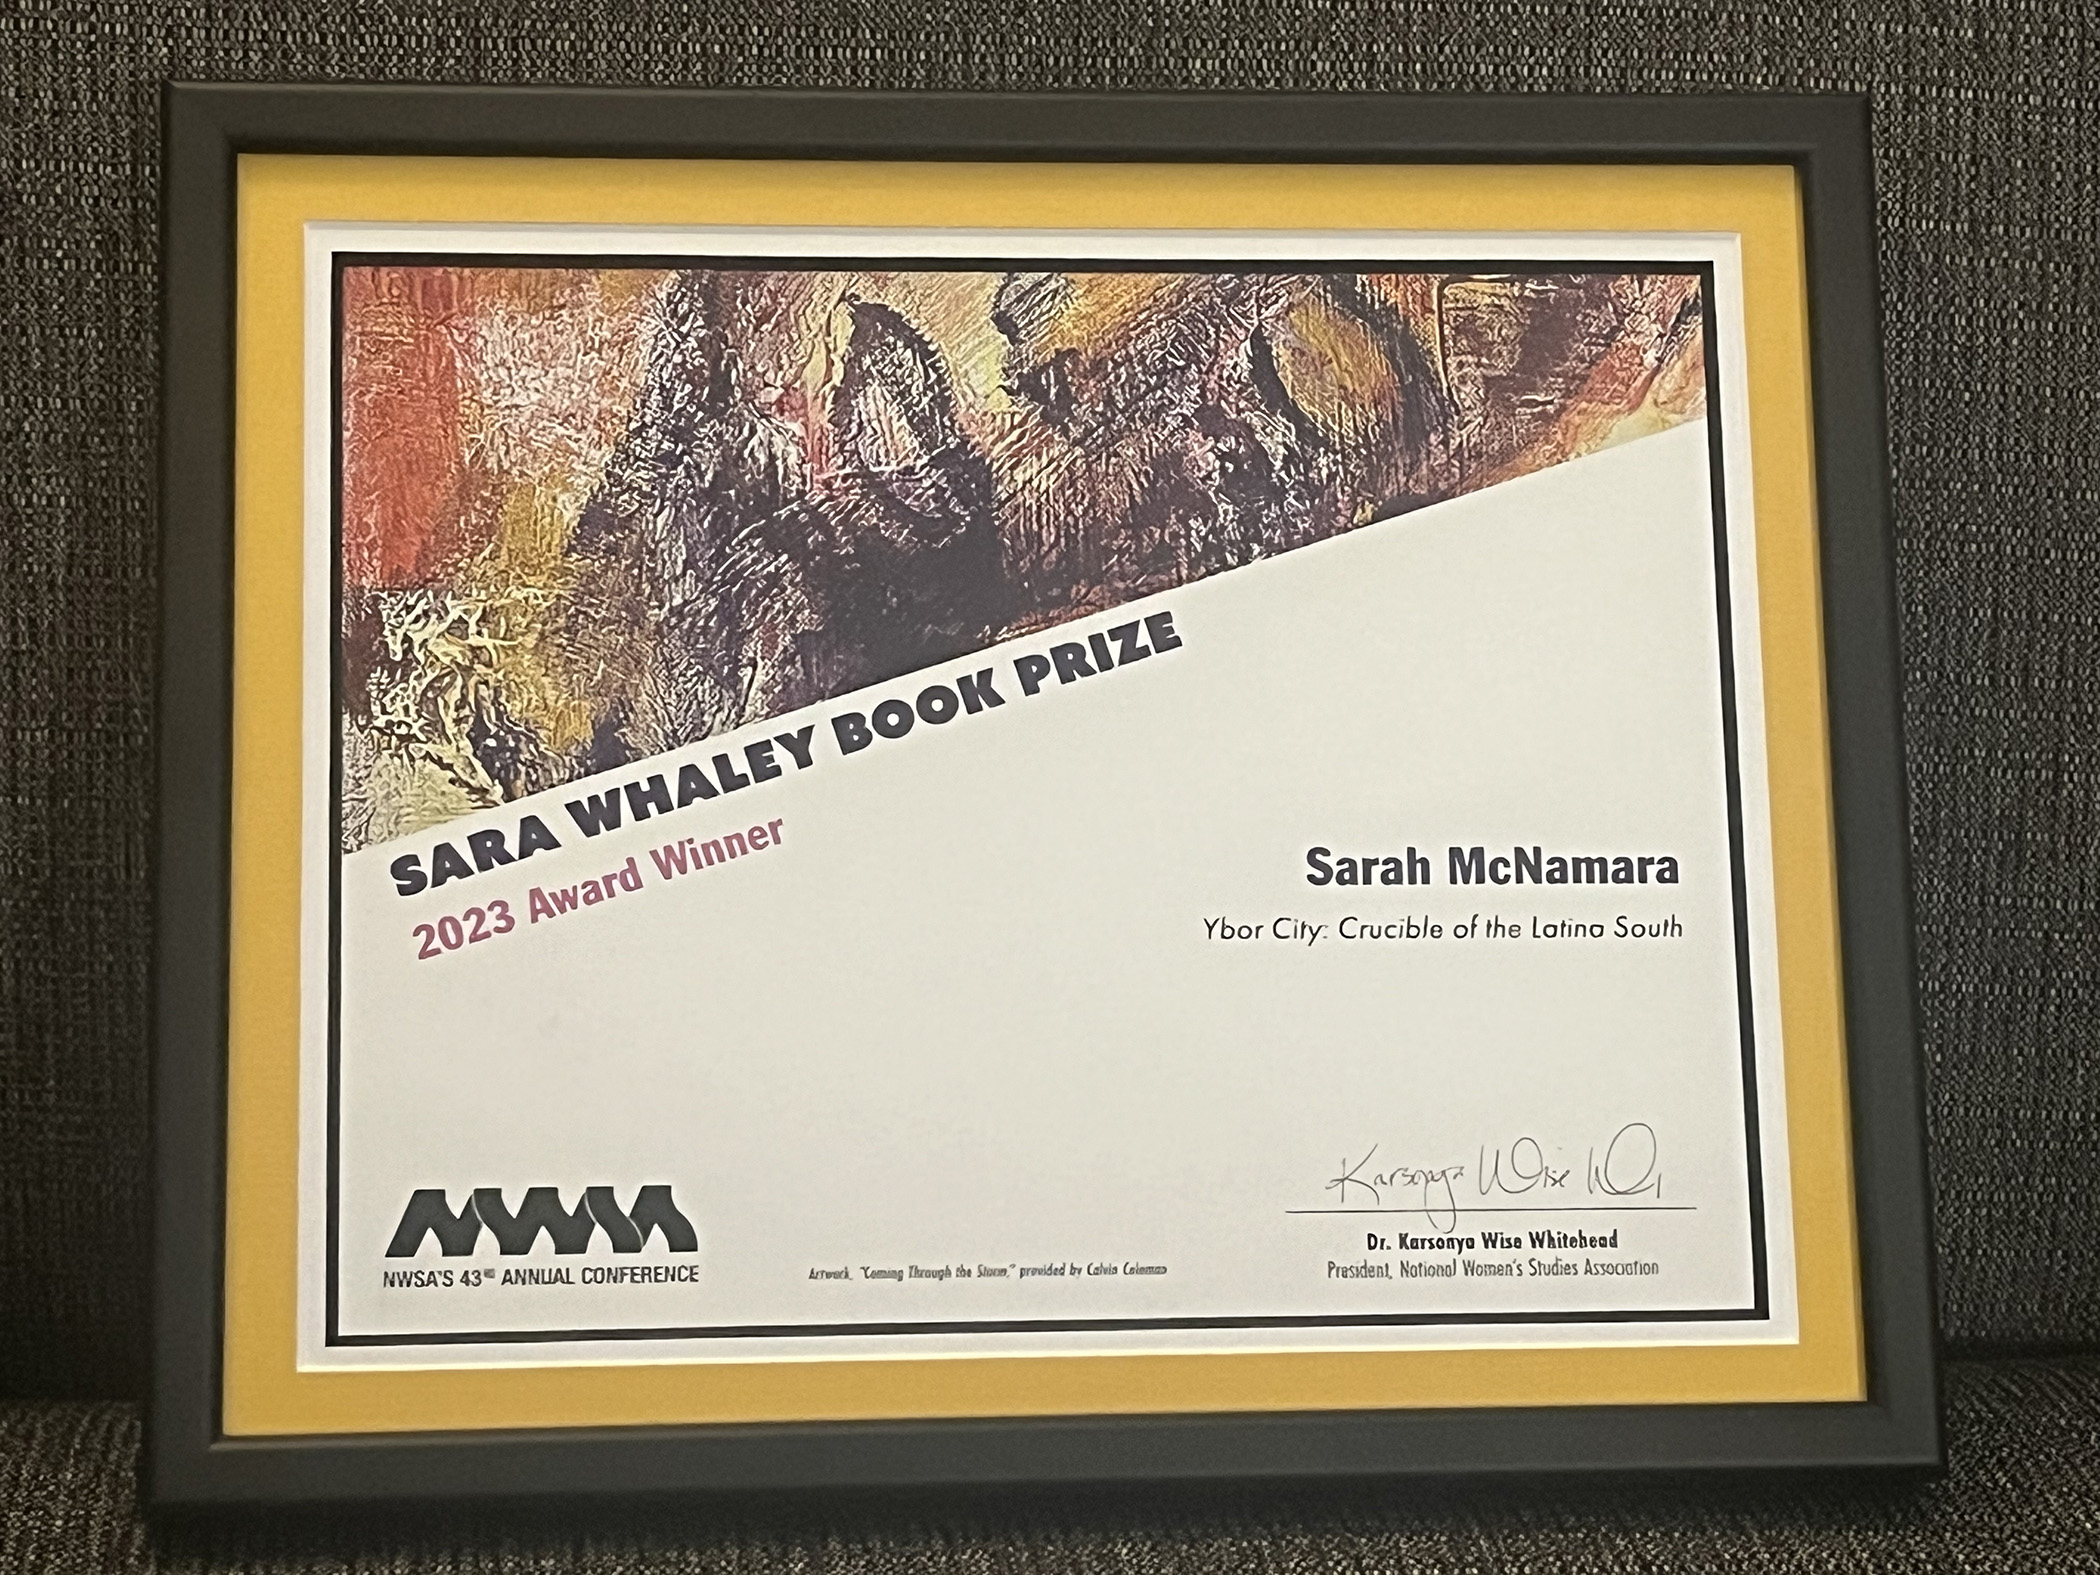 Image of Texas A&amp;M University history professor Sarah McNamara's certificate acknowledging her 2023 Sara A. Whaley Book Prize from the National Women’s Studies Association in recognition of her book, "Ybor City: Crucible of the Latina South"